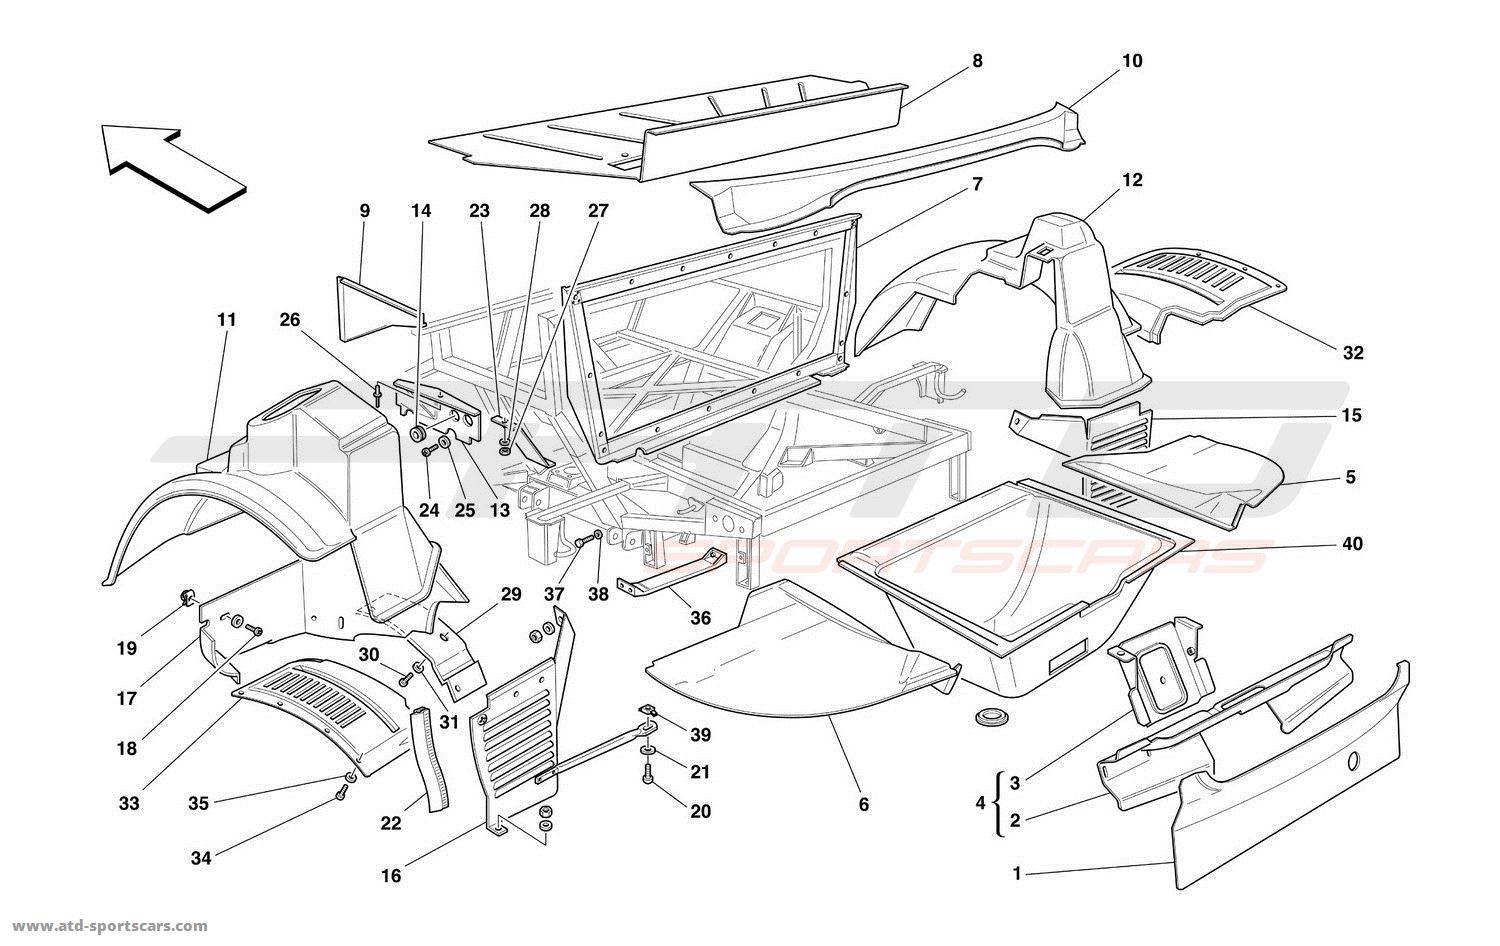 REAR STRUCTURES AND COMPONENTS